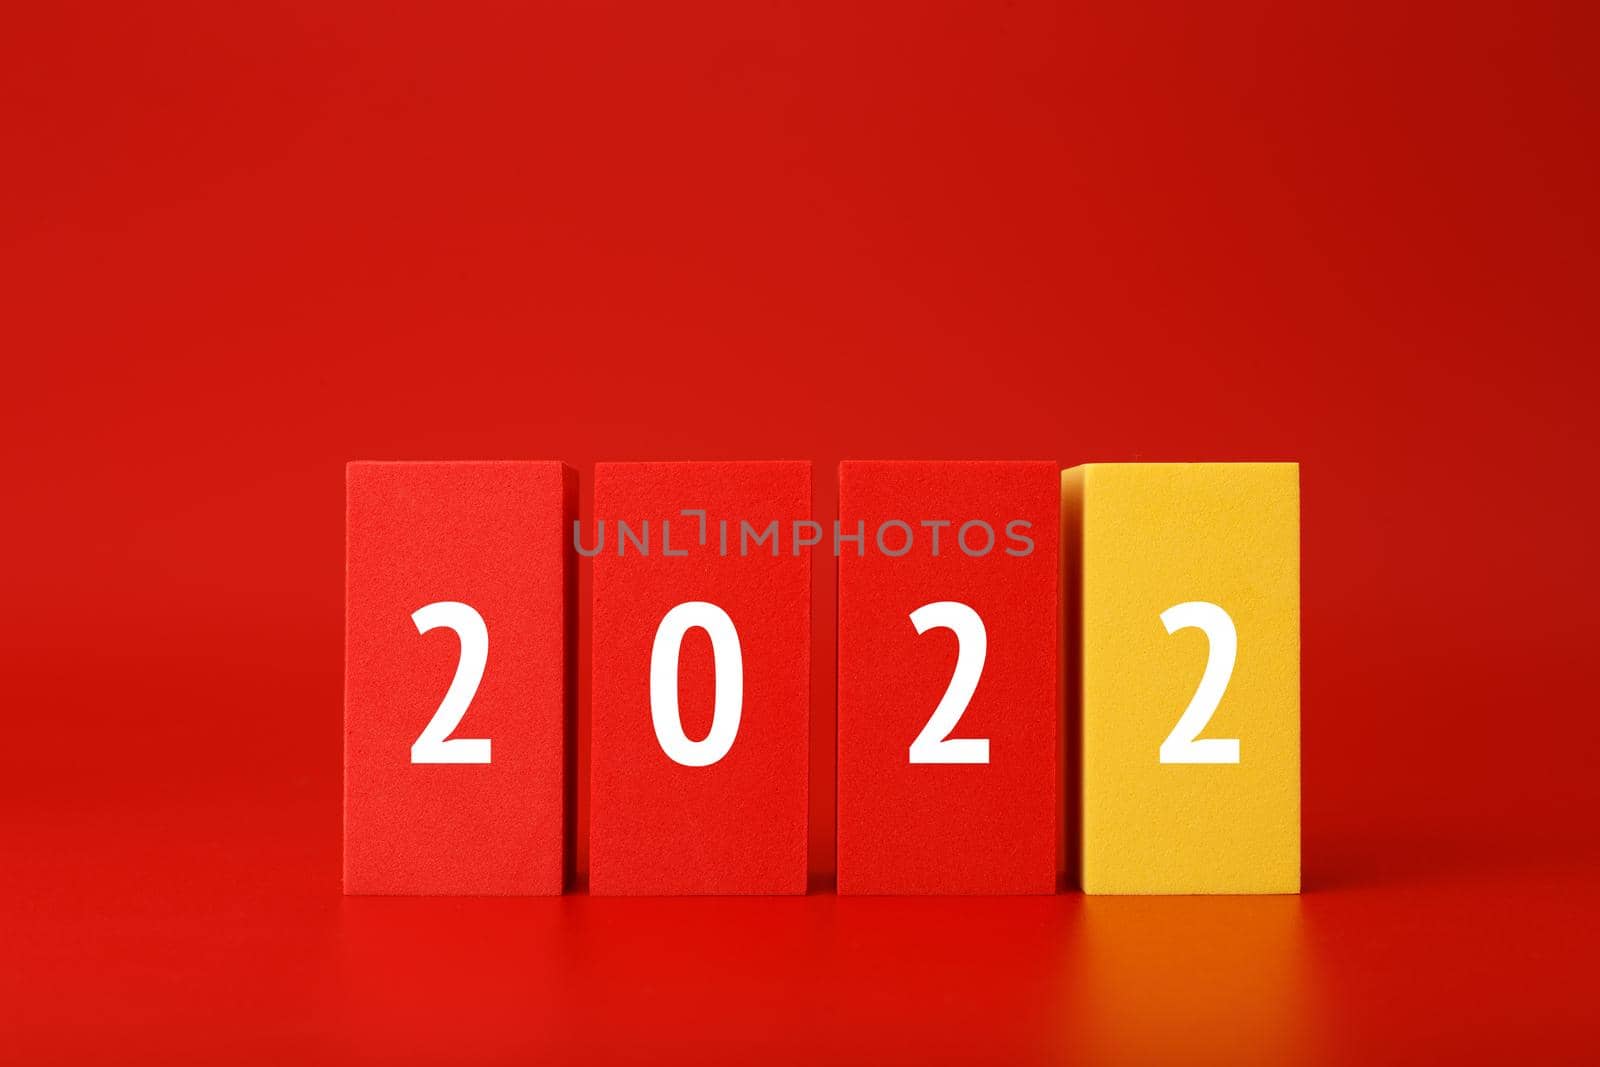 2022 red minimal trendy concept. Modern composition with red blocks with written 2022 numbers against red background with copy space.